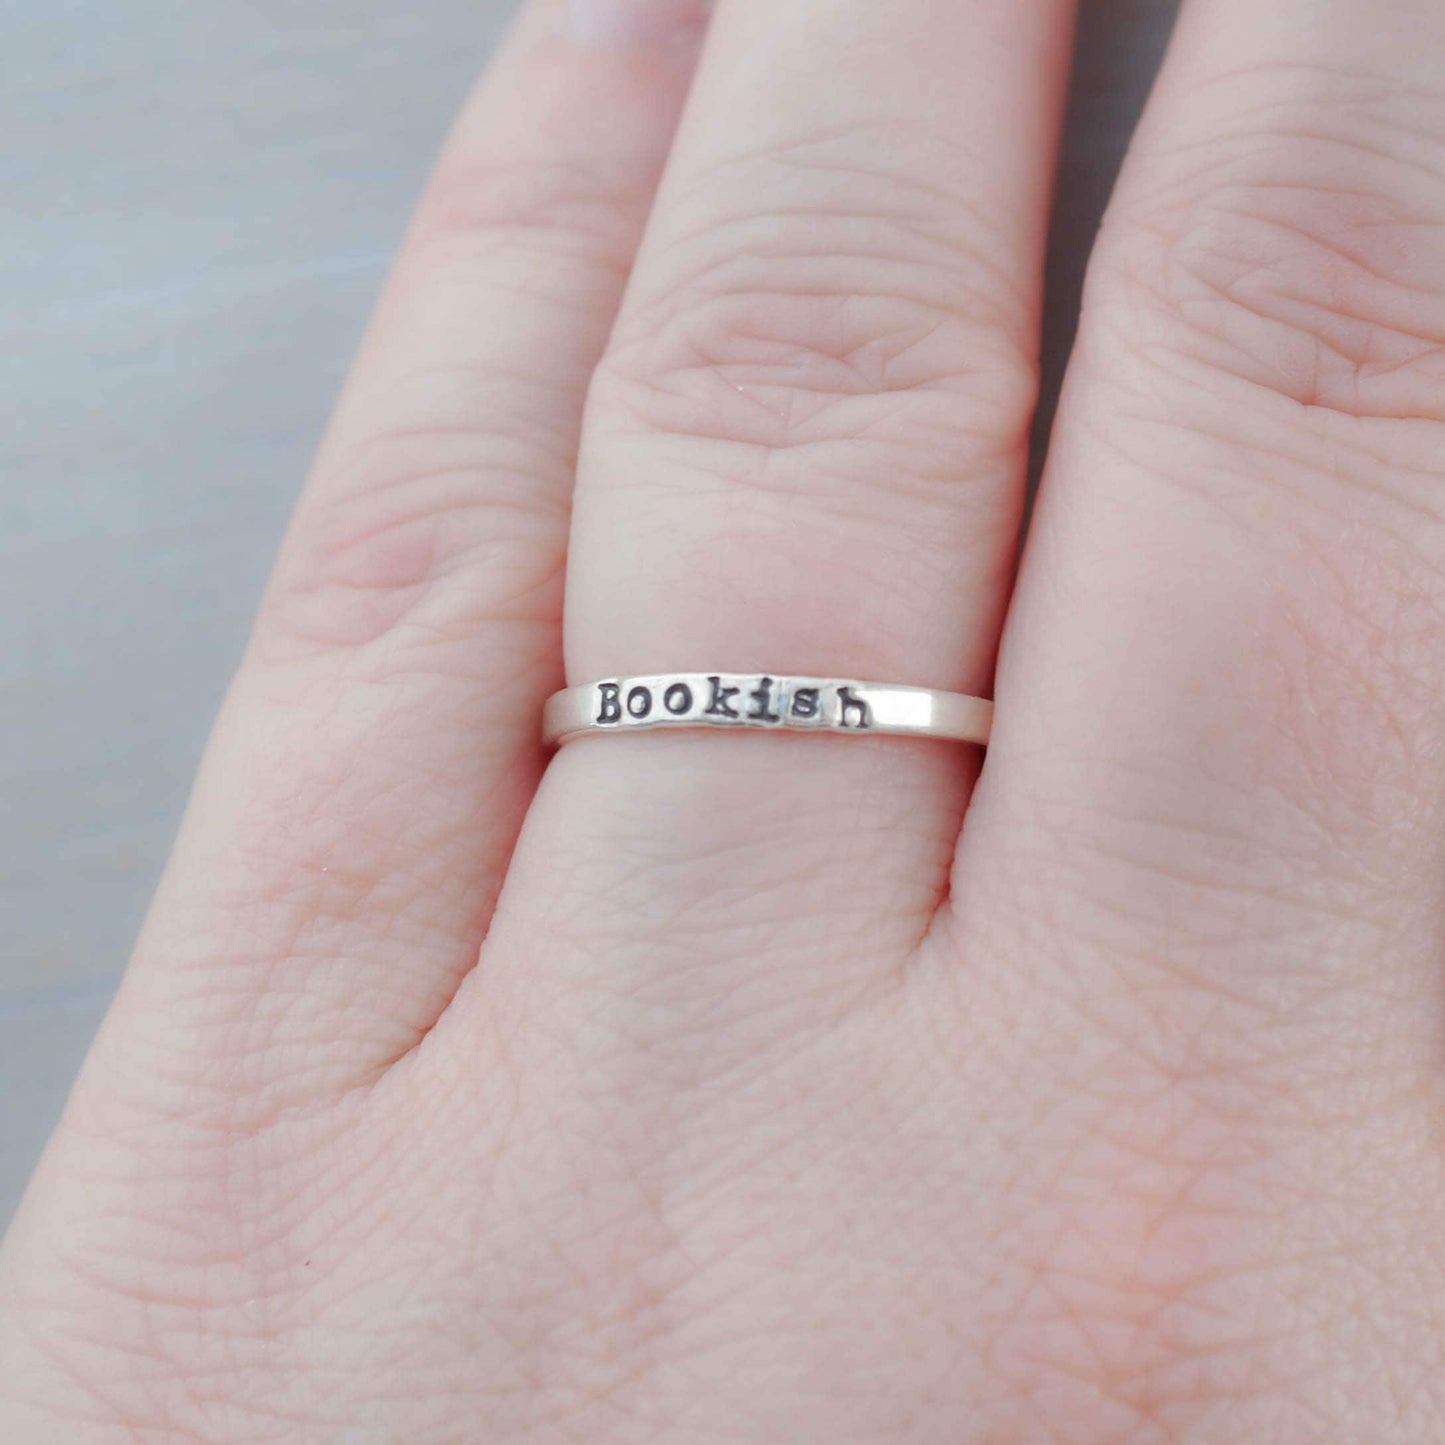 Bookish Book Lover Sterling Silver Ring